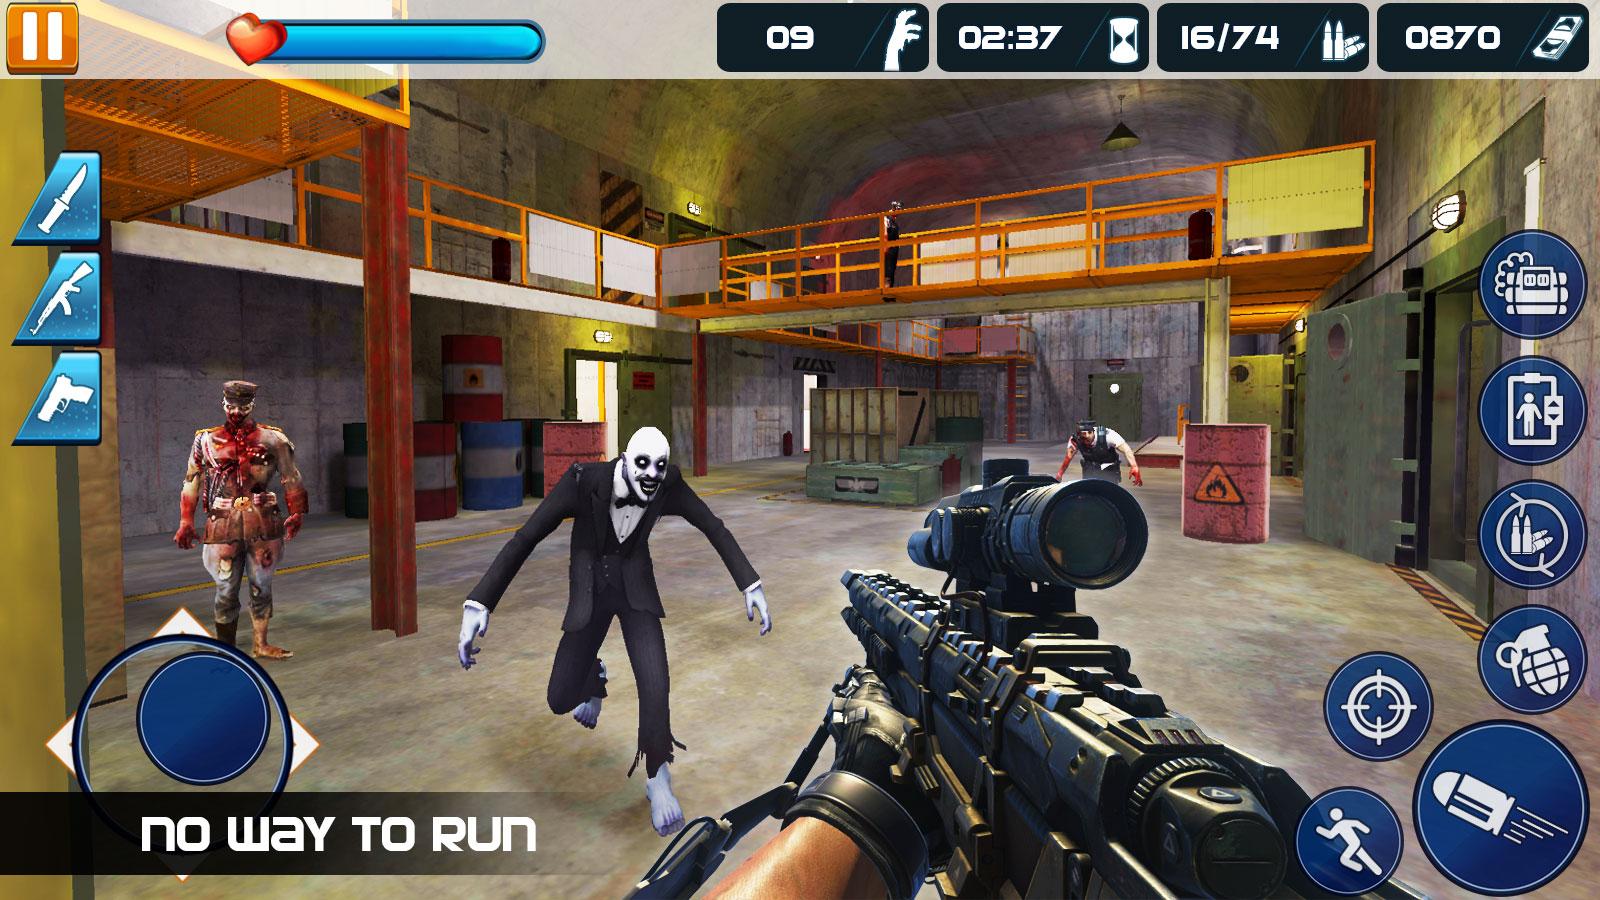 Real zombie hunter 2: FPS Shooting in Halloween for Android ... - 